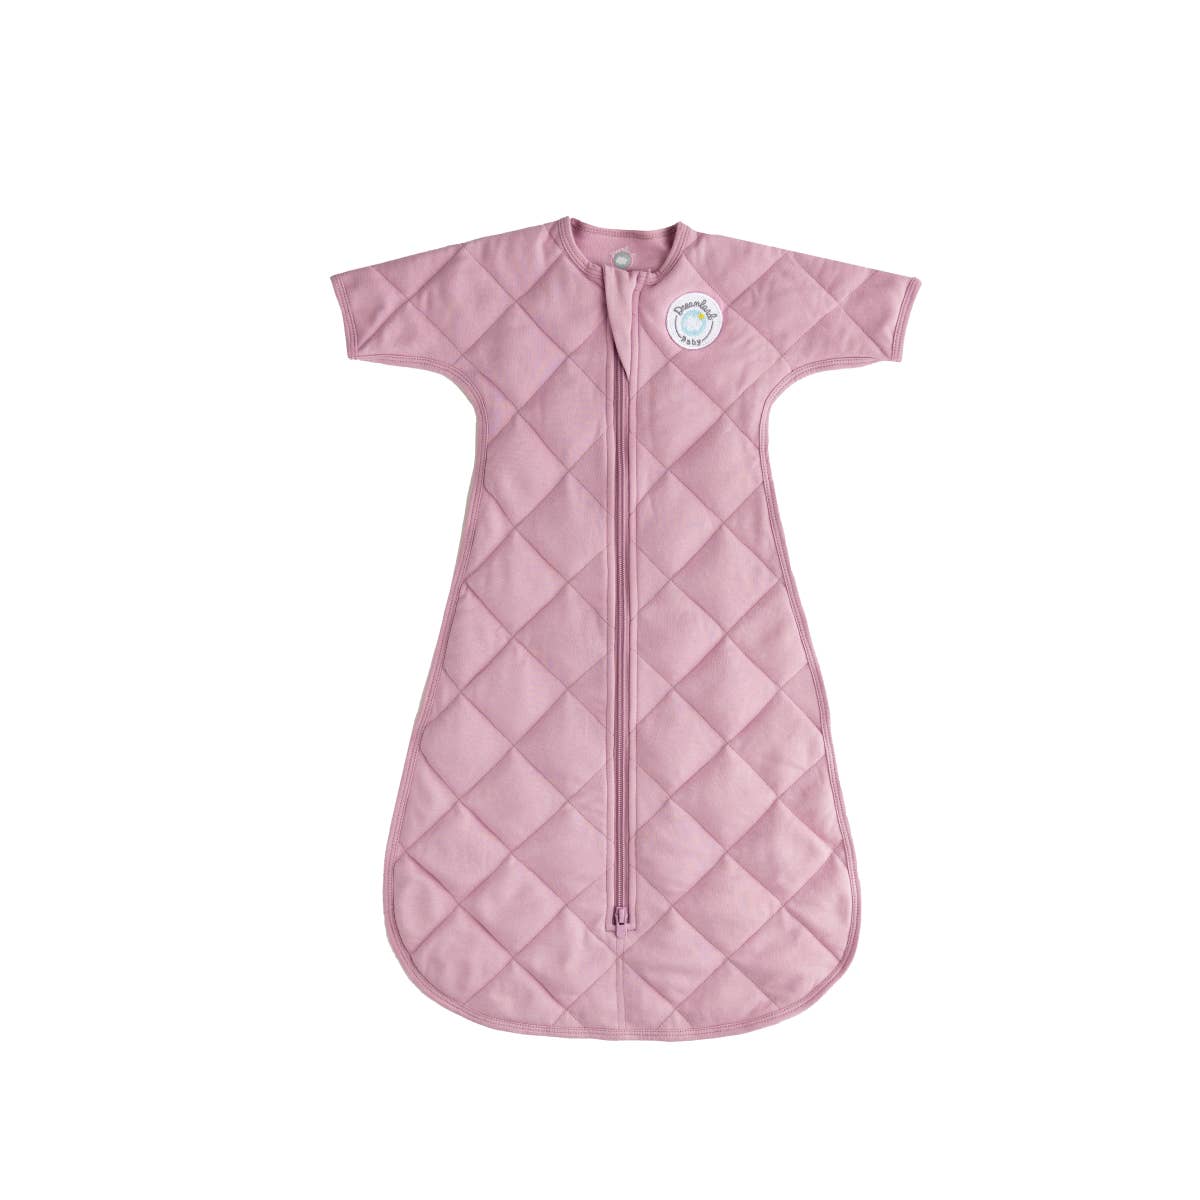 Dream Weighted Transition Swaddle - Misty Mauve